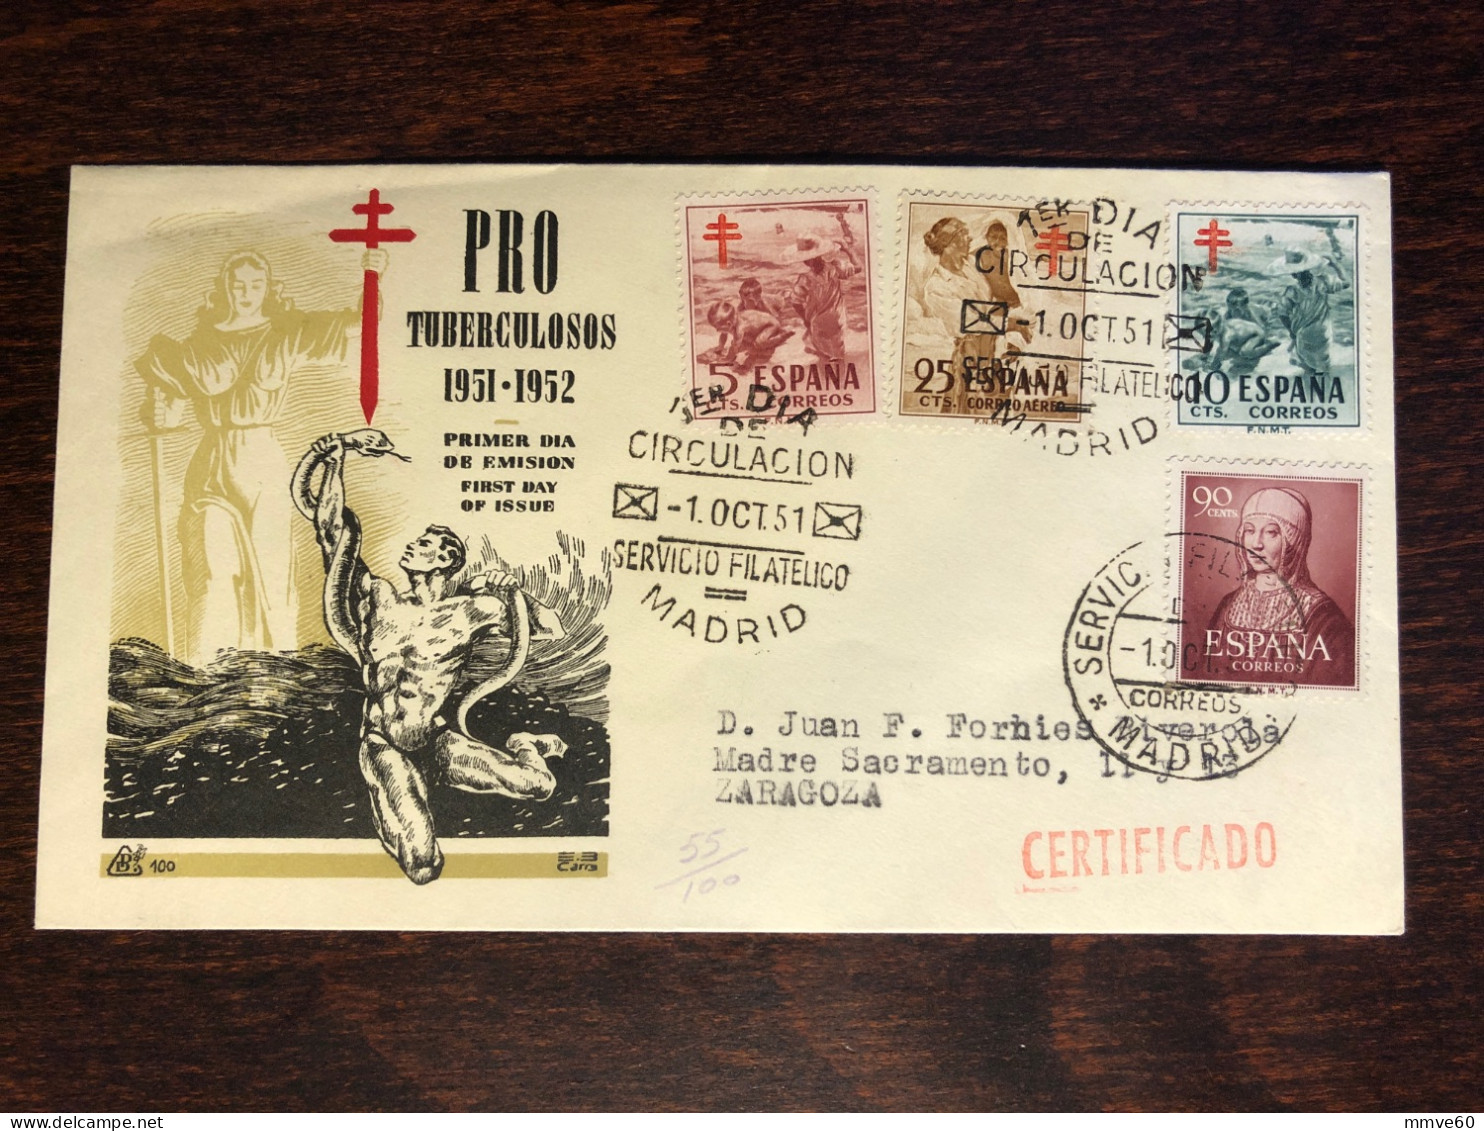 SPAIN FDC COVER 1951 YEAR TUBERCULOSIS TBC HEALTH MEDICINE STAMPS - FDC